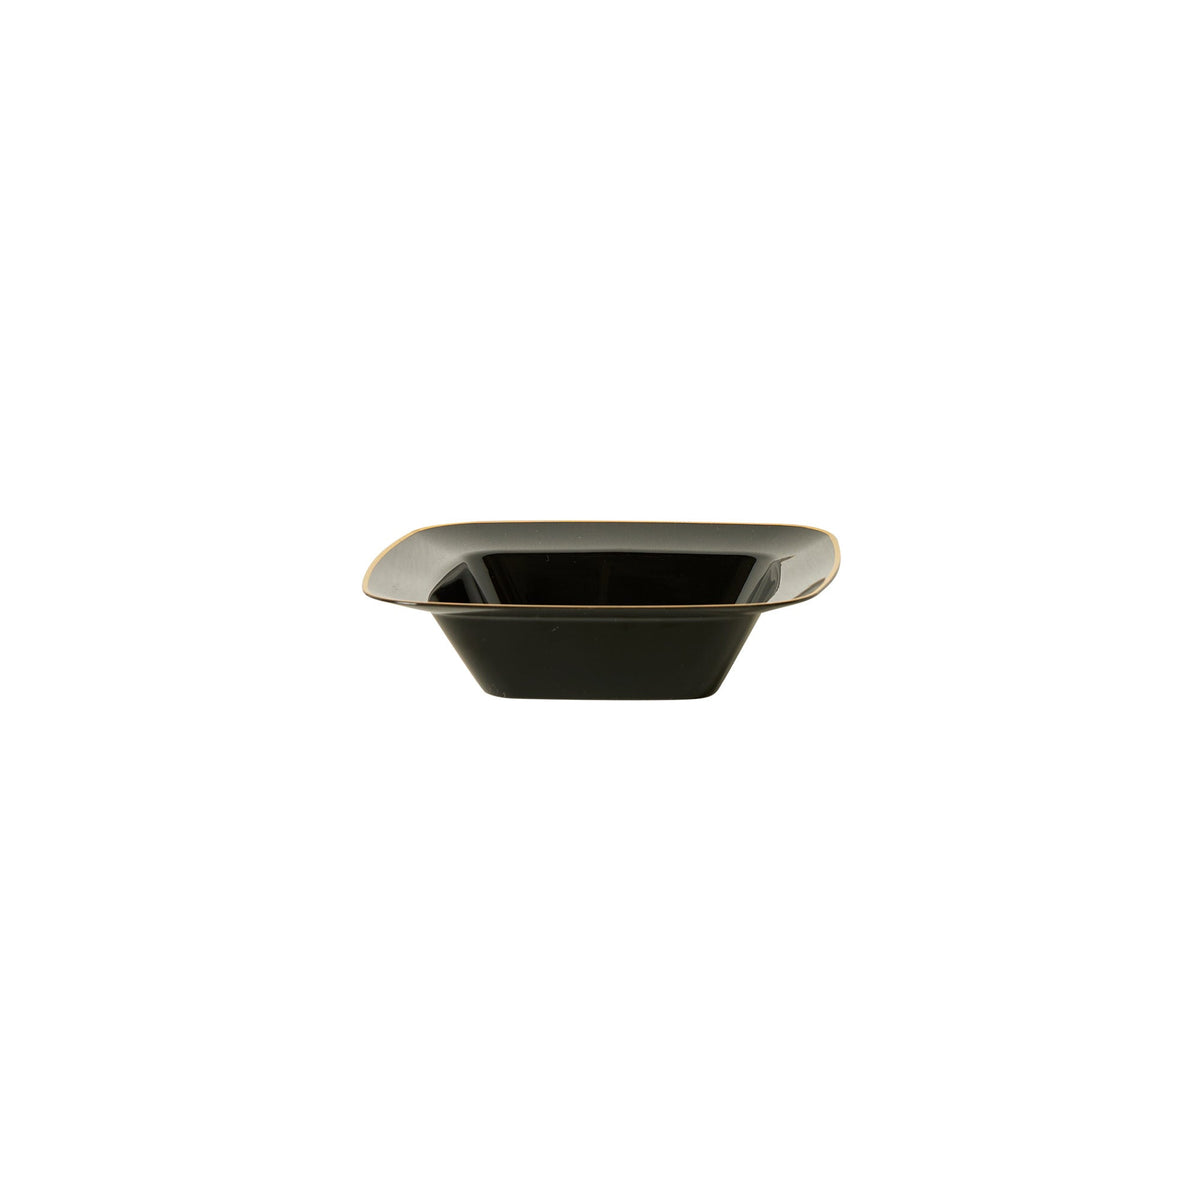 MADISON IMPORTS Disposable-Plasticware Black Premium Quality Small Square Bowls with Gold Rim, 5 Inches, 10 Count 775310991217